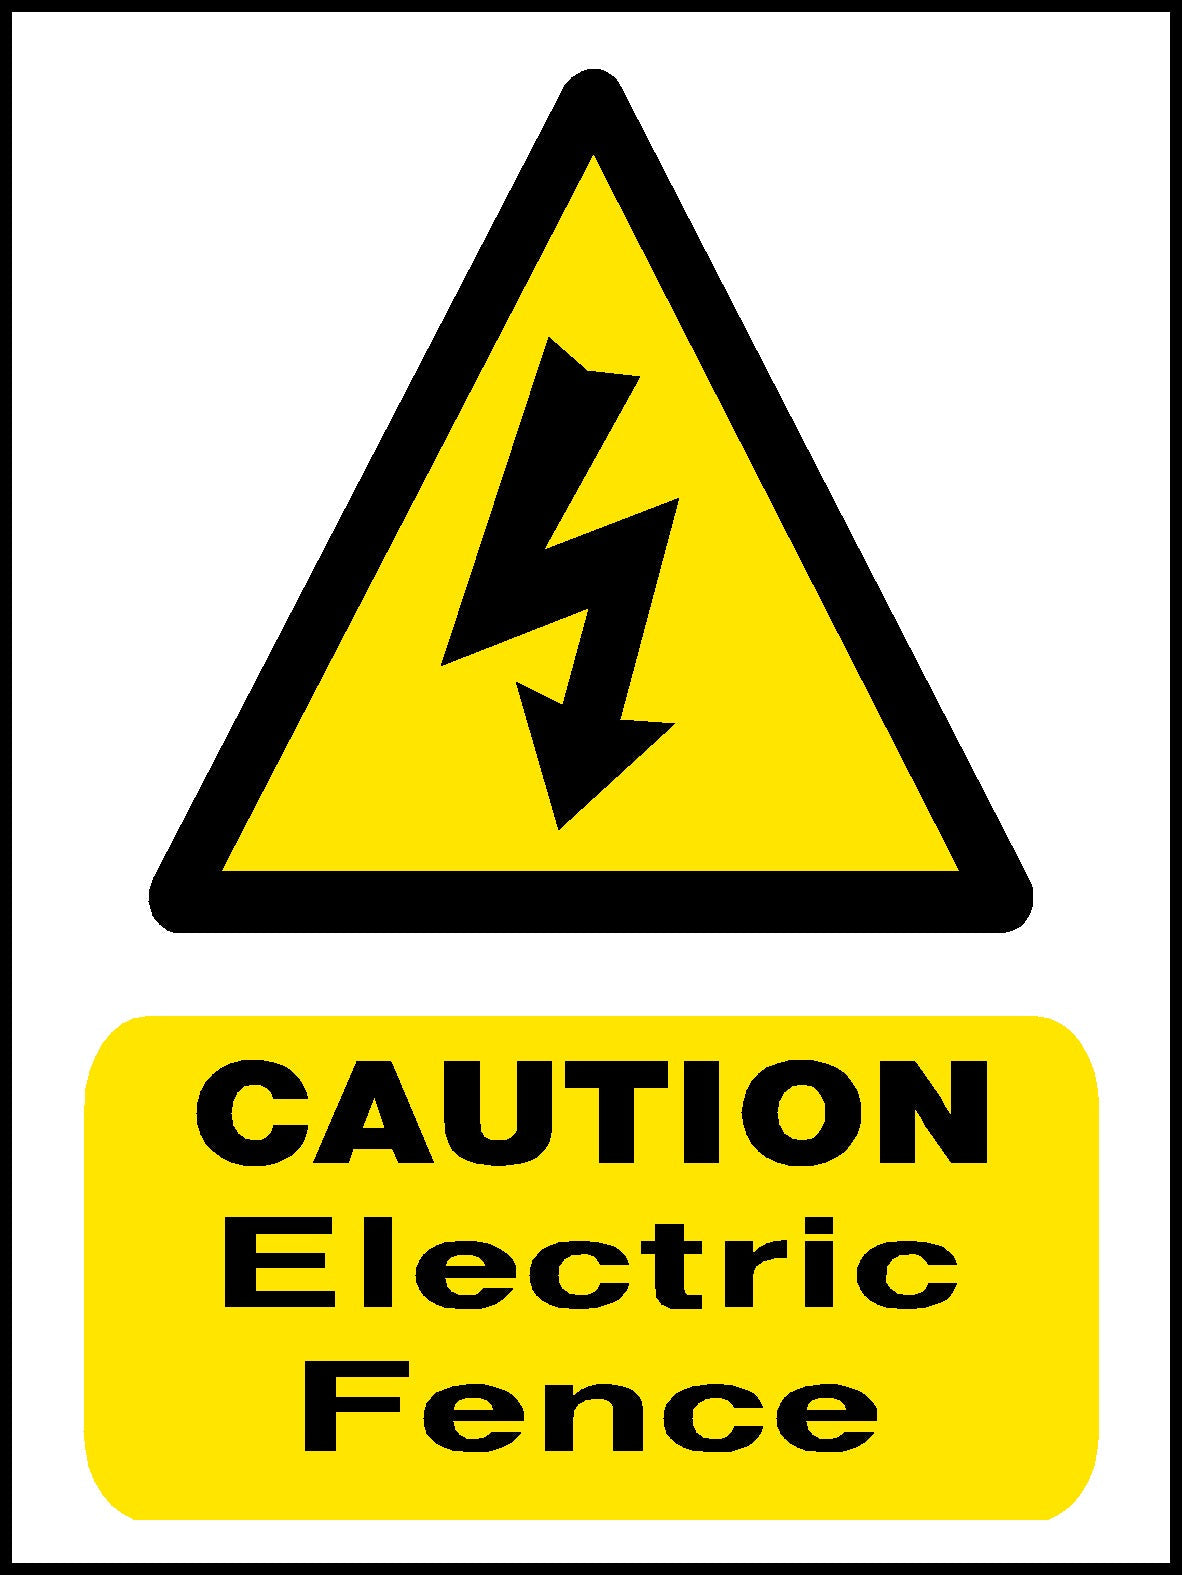 Caution Electric Fence Safety Sign